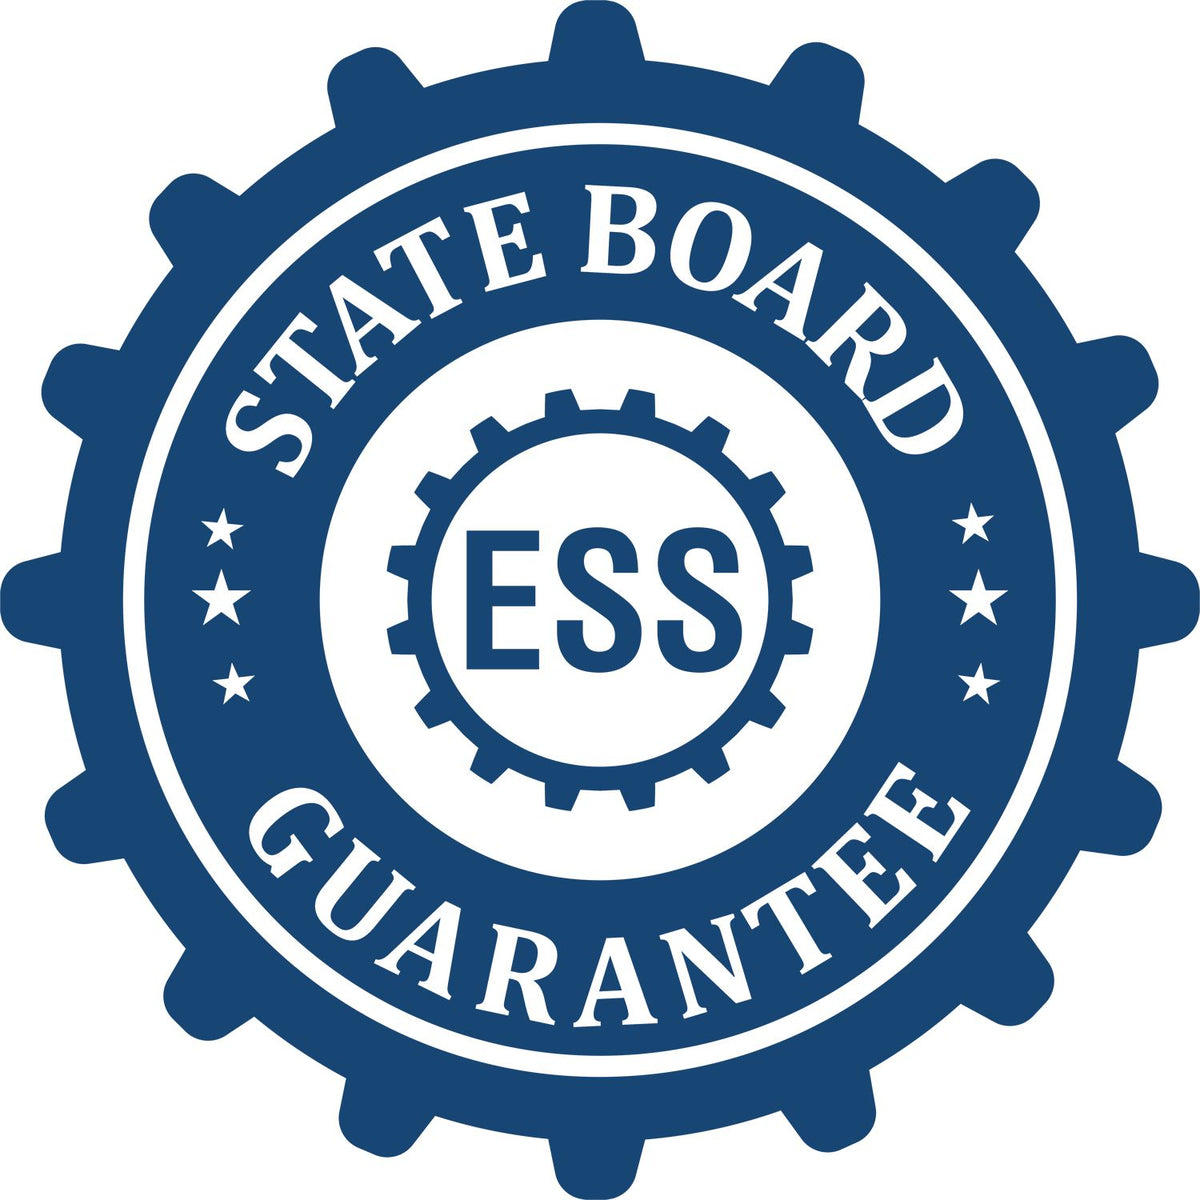 An emblem in a gear shape illustrating a state board guarantee for the State of Minnesota Long Reach Architectural Embossing Seal product.